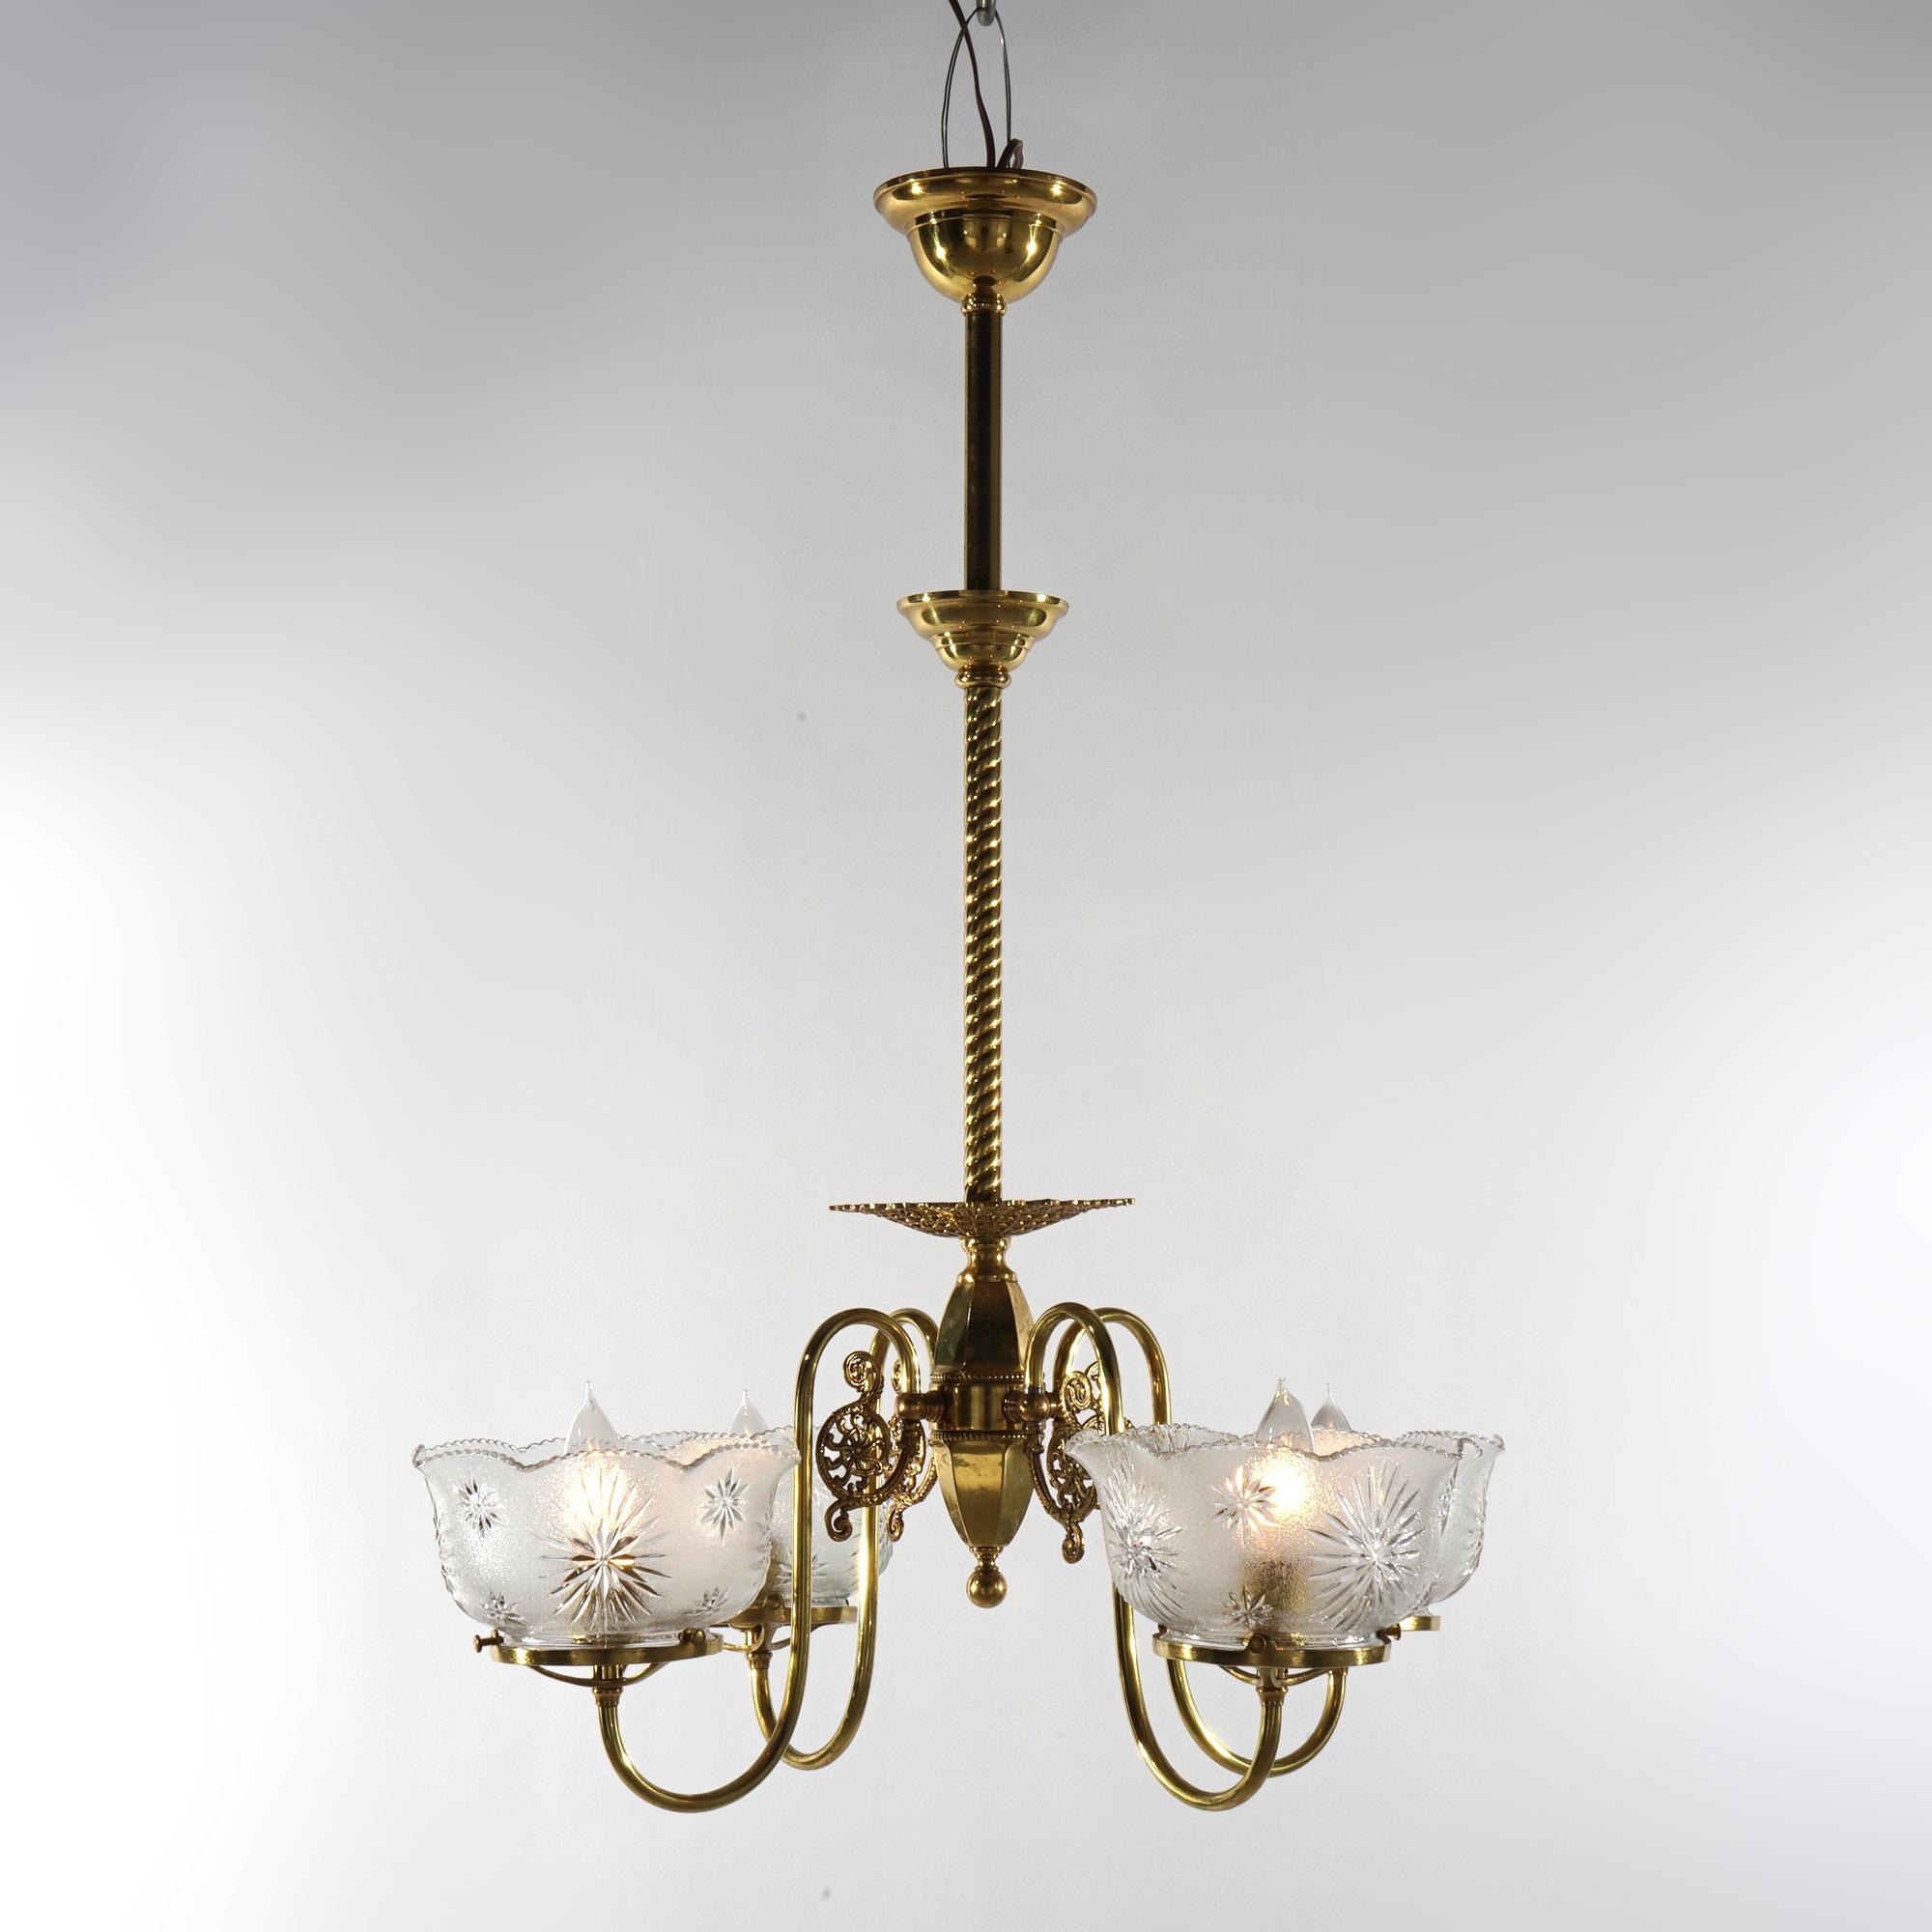 Antique Brass Four-Arm Gas Light Hanging Fixture with Glass Shades C1880 For Sale 4